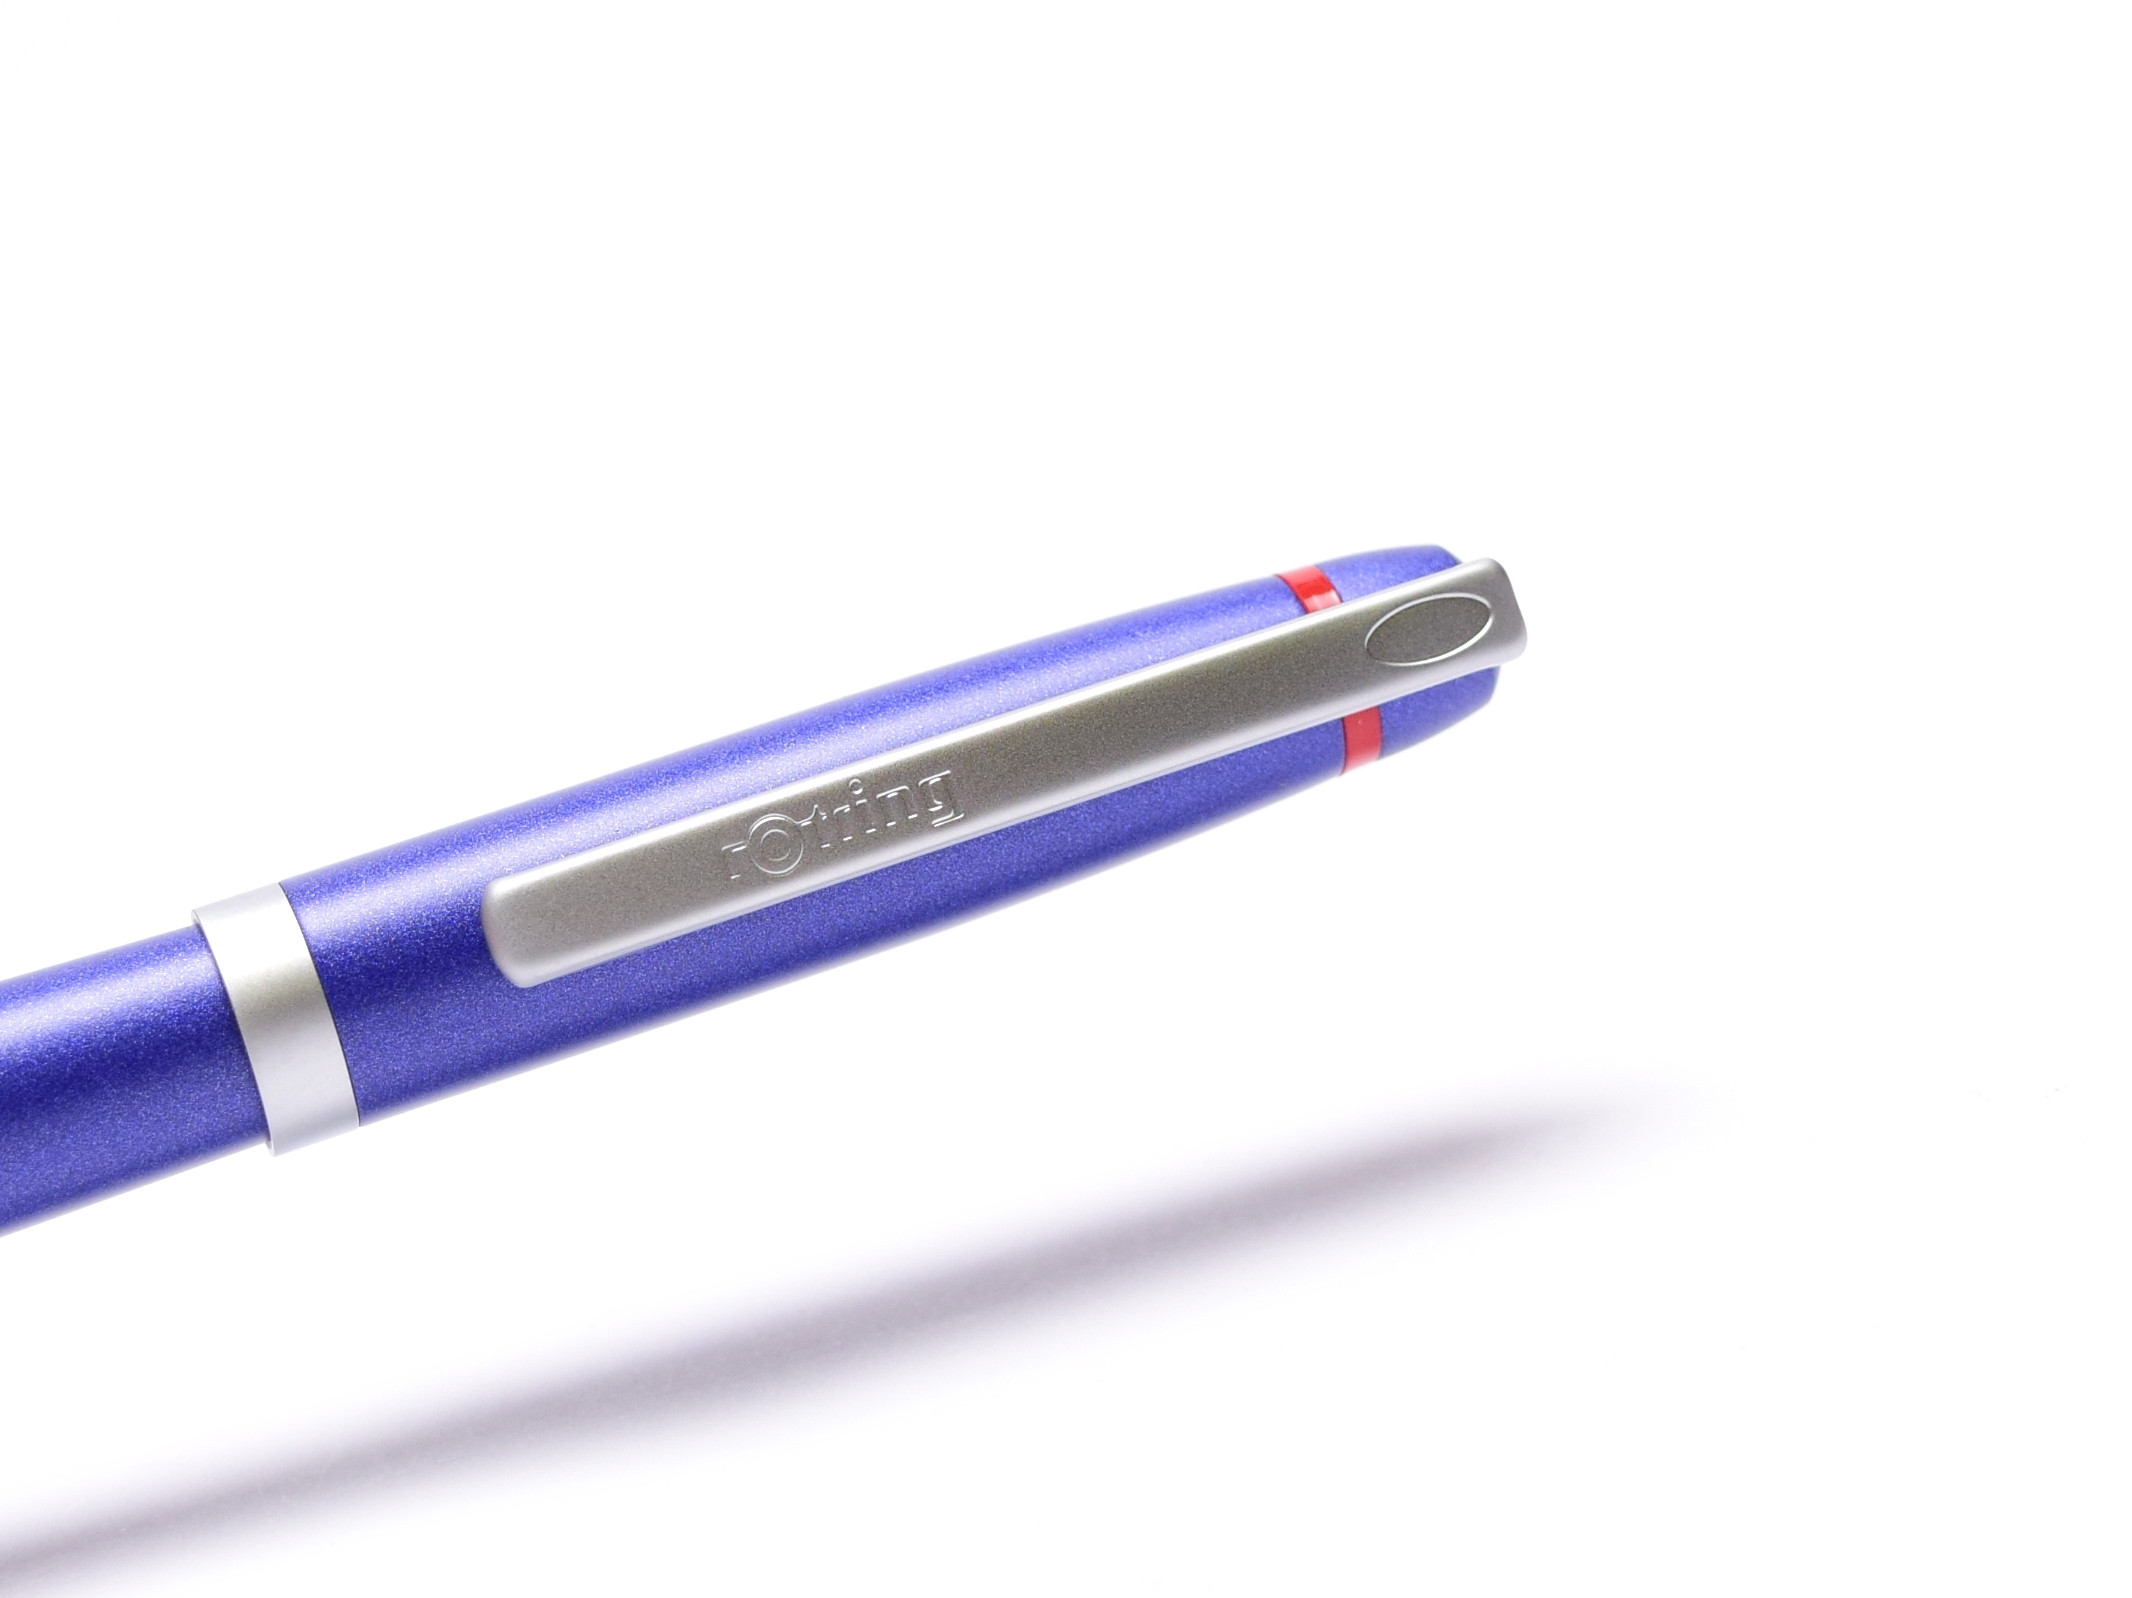 ROTRING INITIAL METAL BLUE ROLLERBALL S0211190